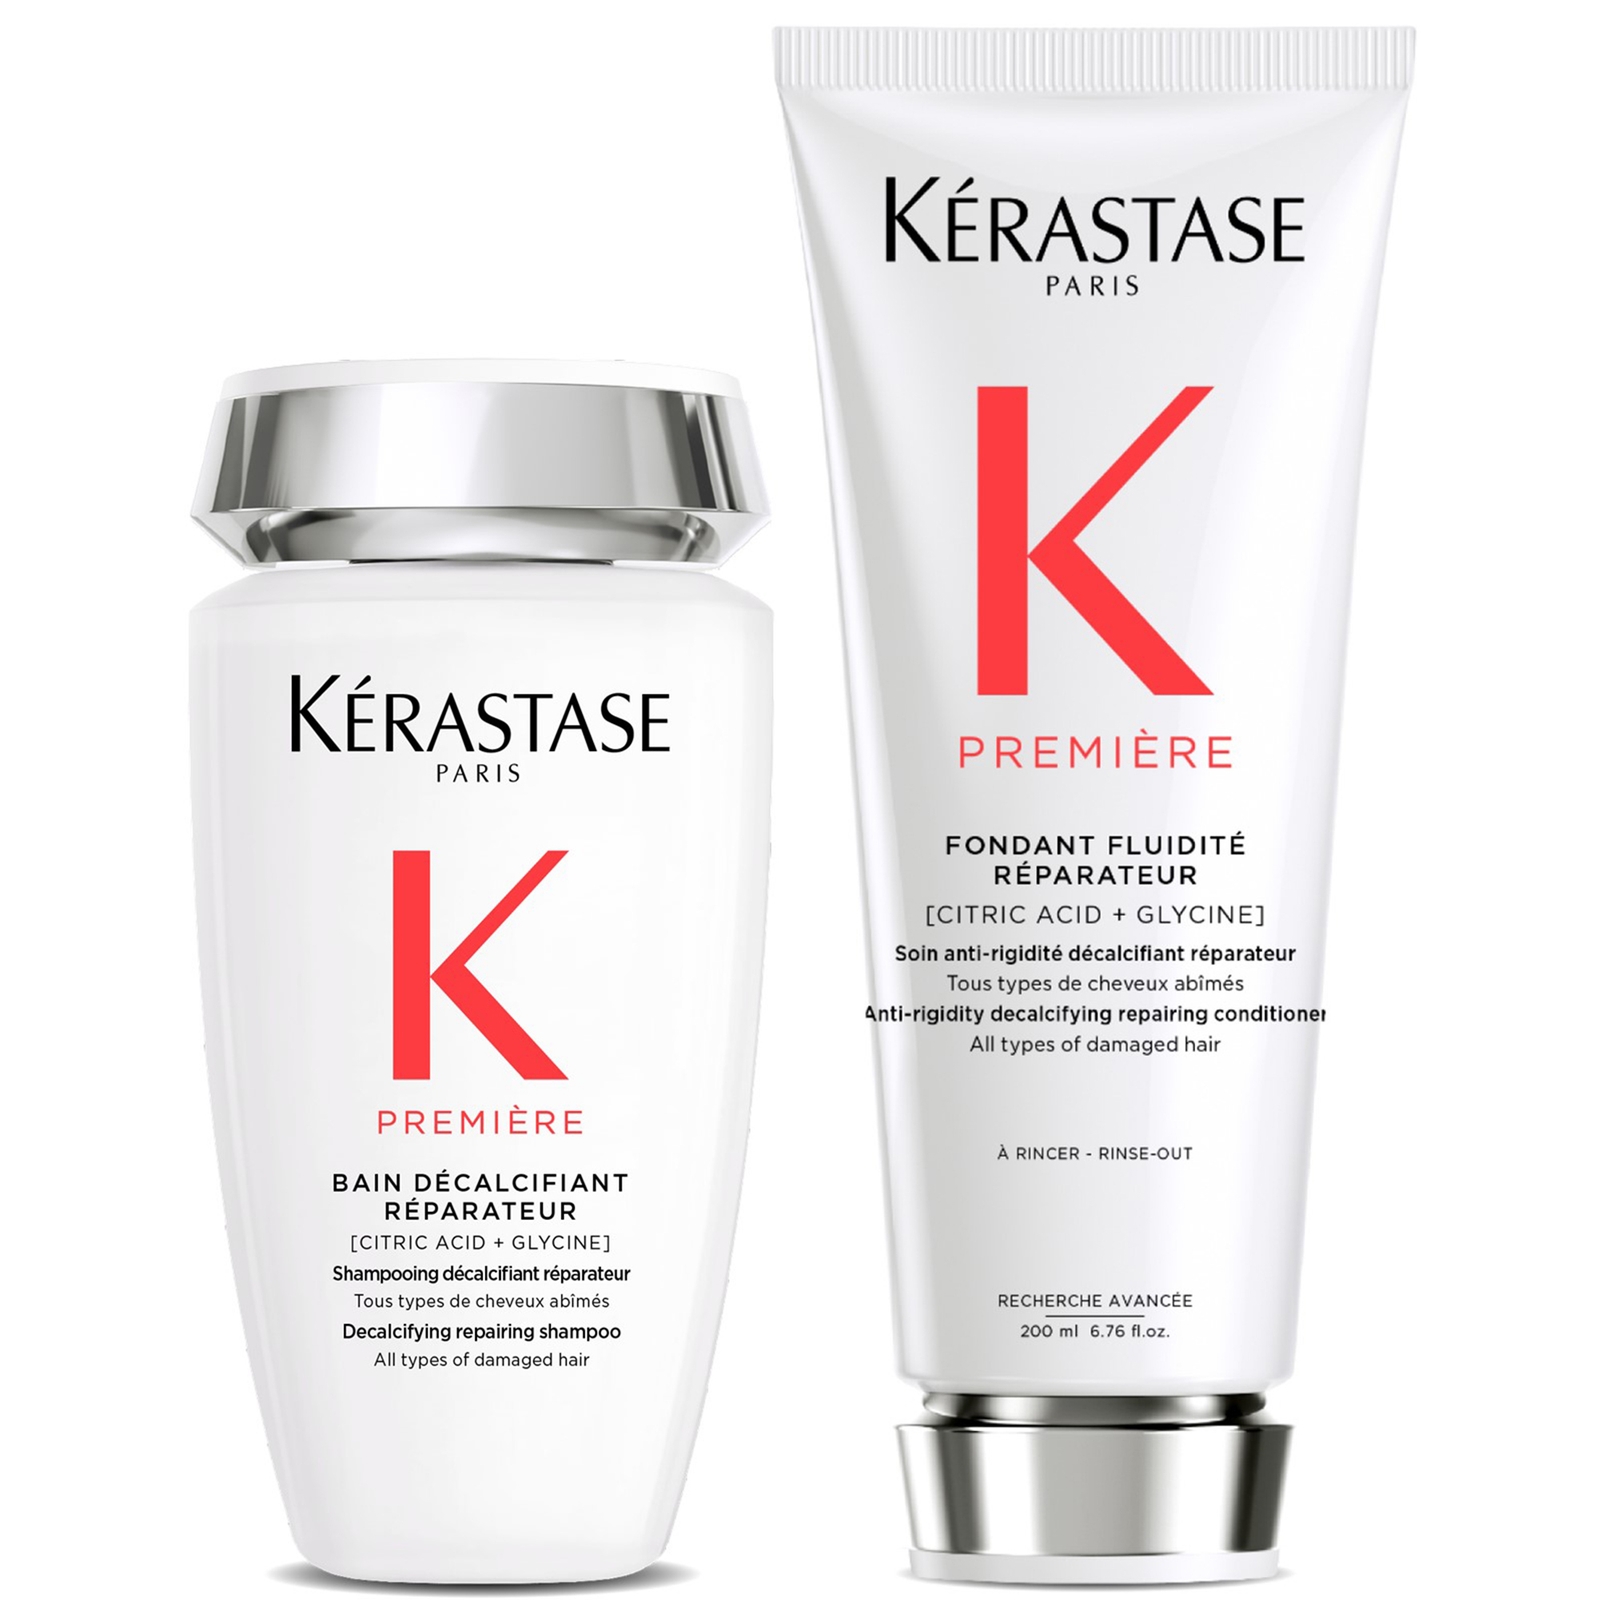 Image of Kérastase Première Decalcifying Repairing Shampoo and Conditioner Duo for Damaged Hair with Pure Citric Acid and Glycine